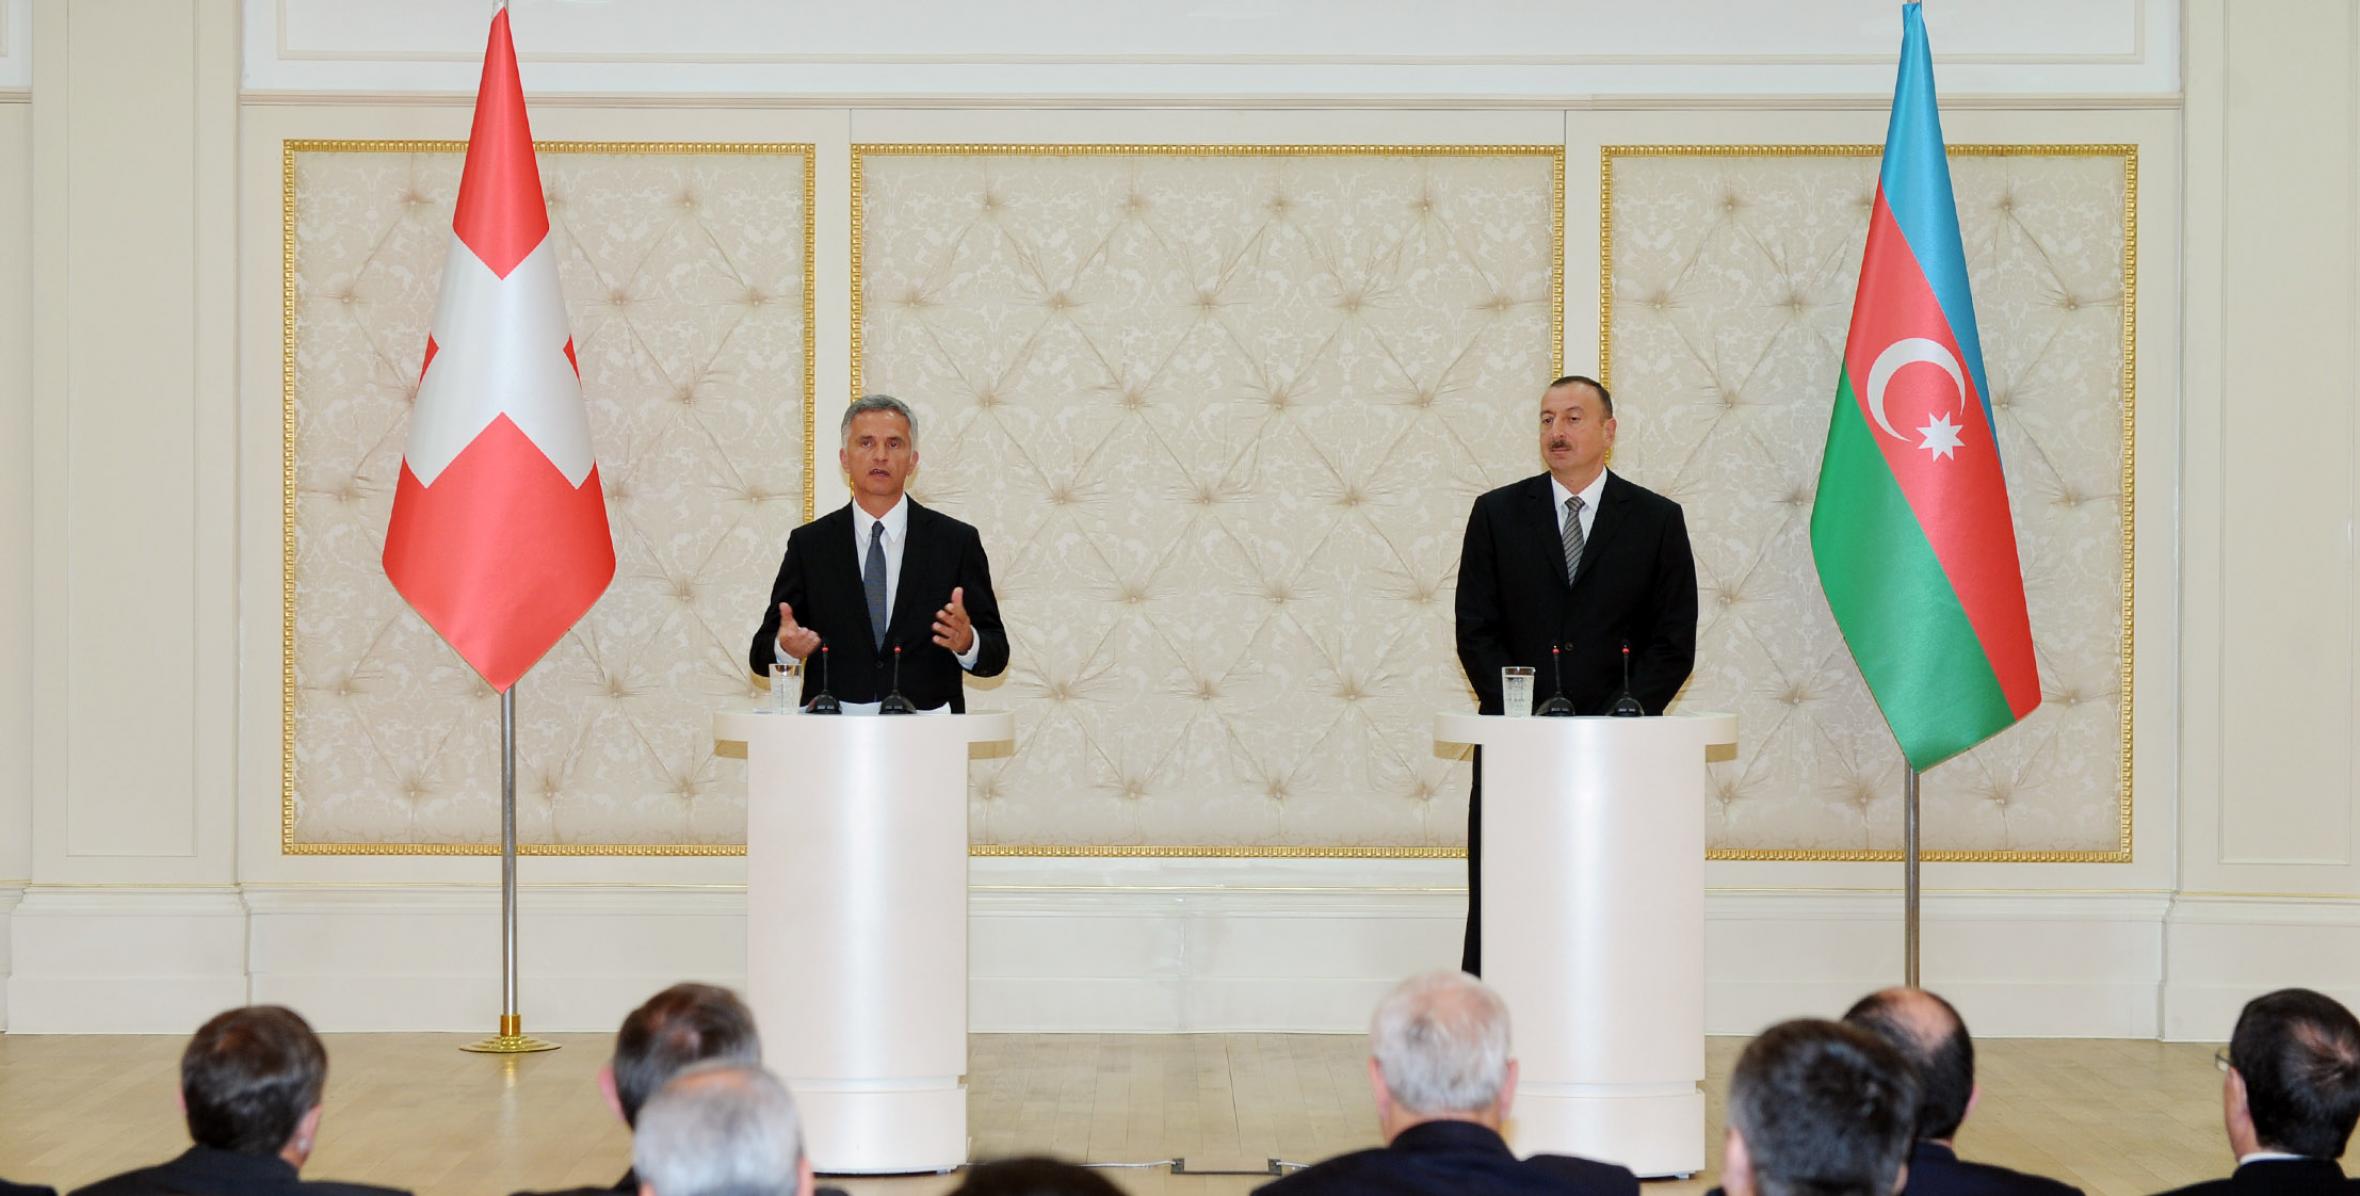 Ilham Aliyev and President of the Swiss Confederation Didier Burkhalter made statements for the press